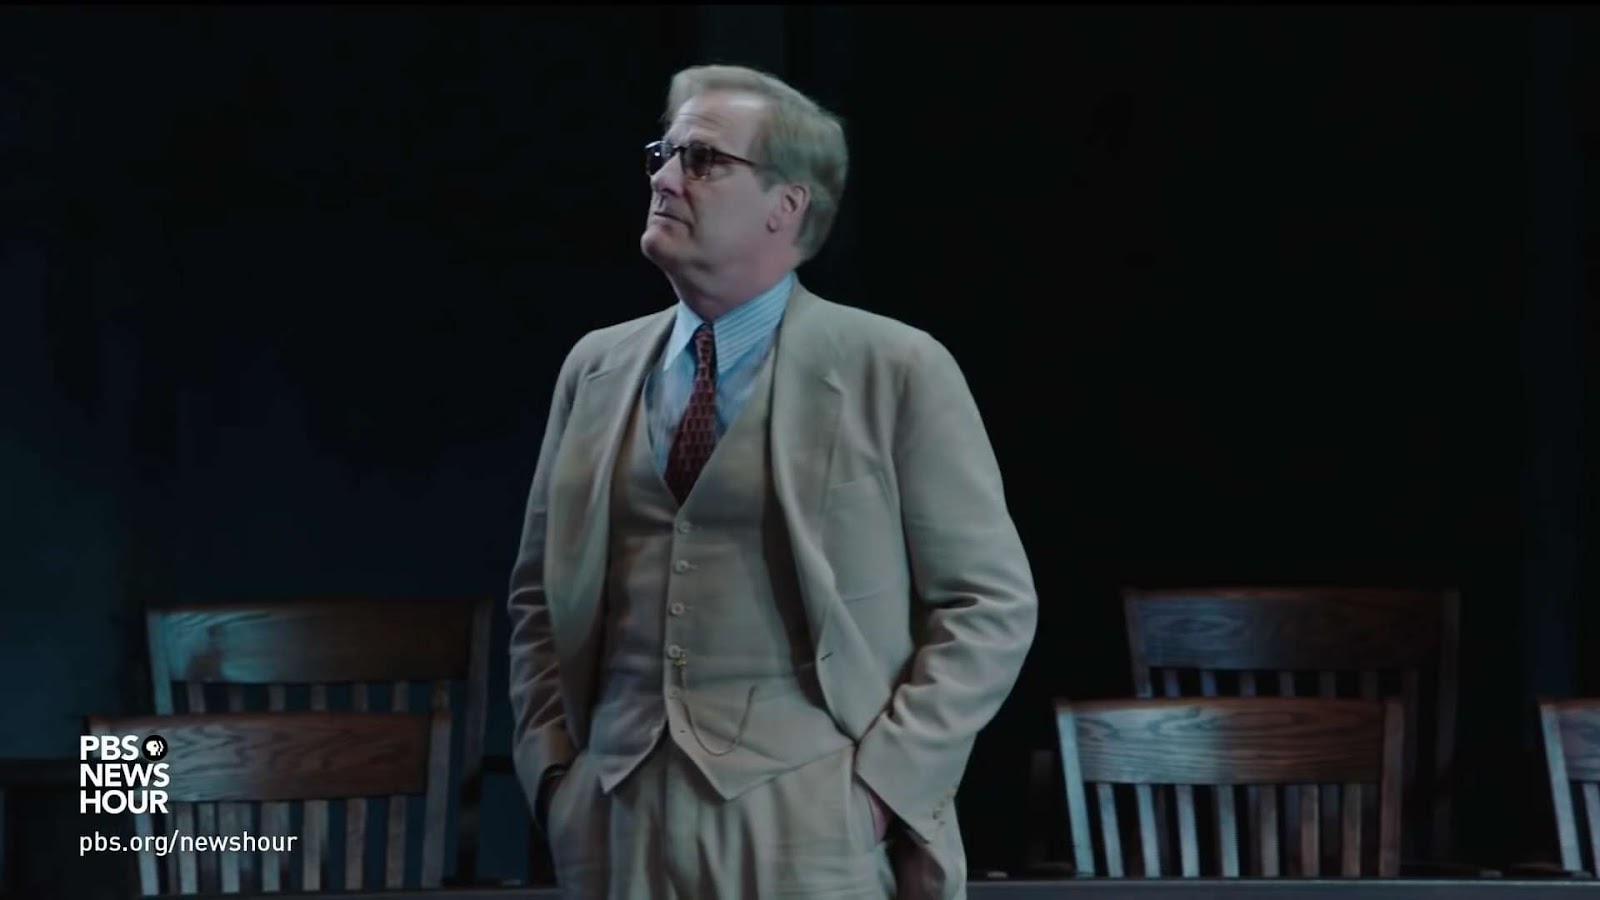 Reviewing ‘To Kill a Mockingbird’ on the Theater Stage